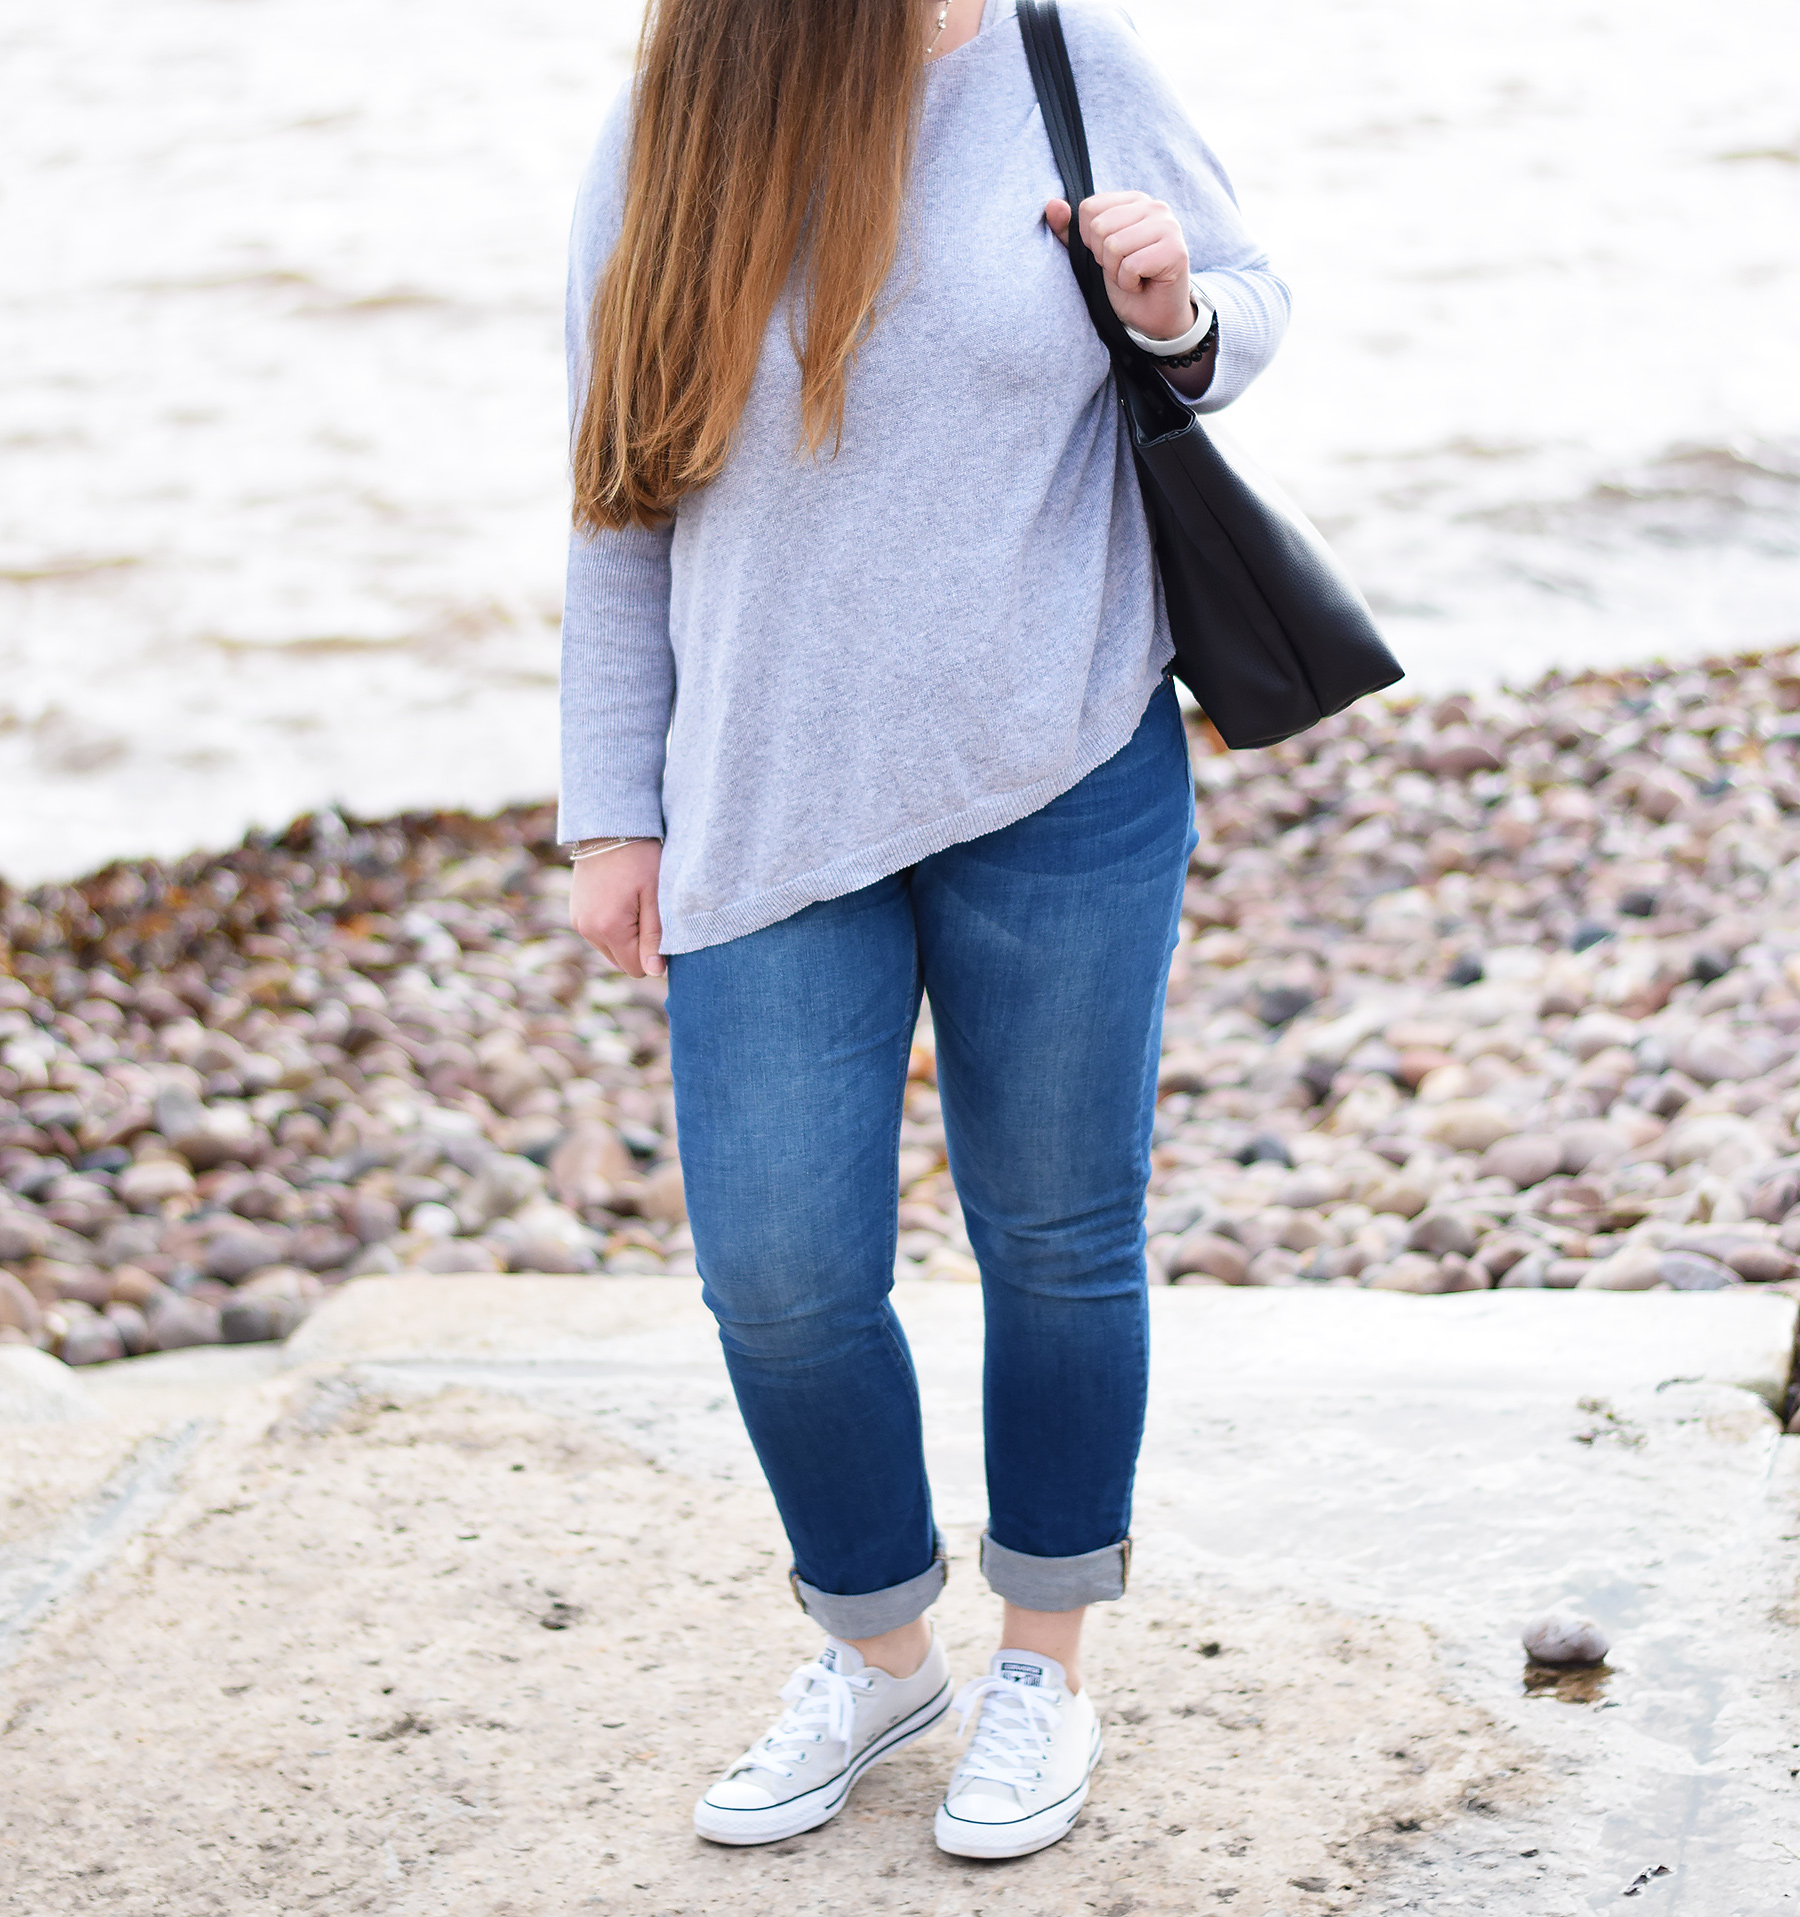 GREY ASYMETRIC SHAPE JUMPER AND CROPPED JEANS AT THE BEACH